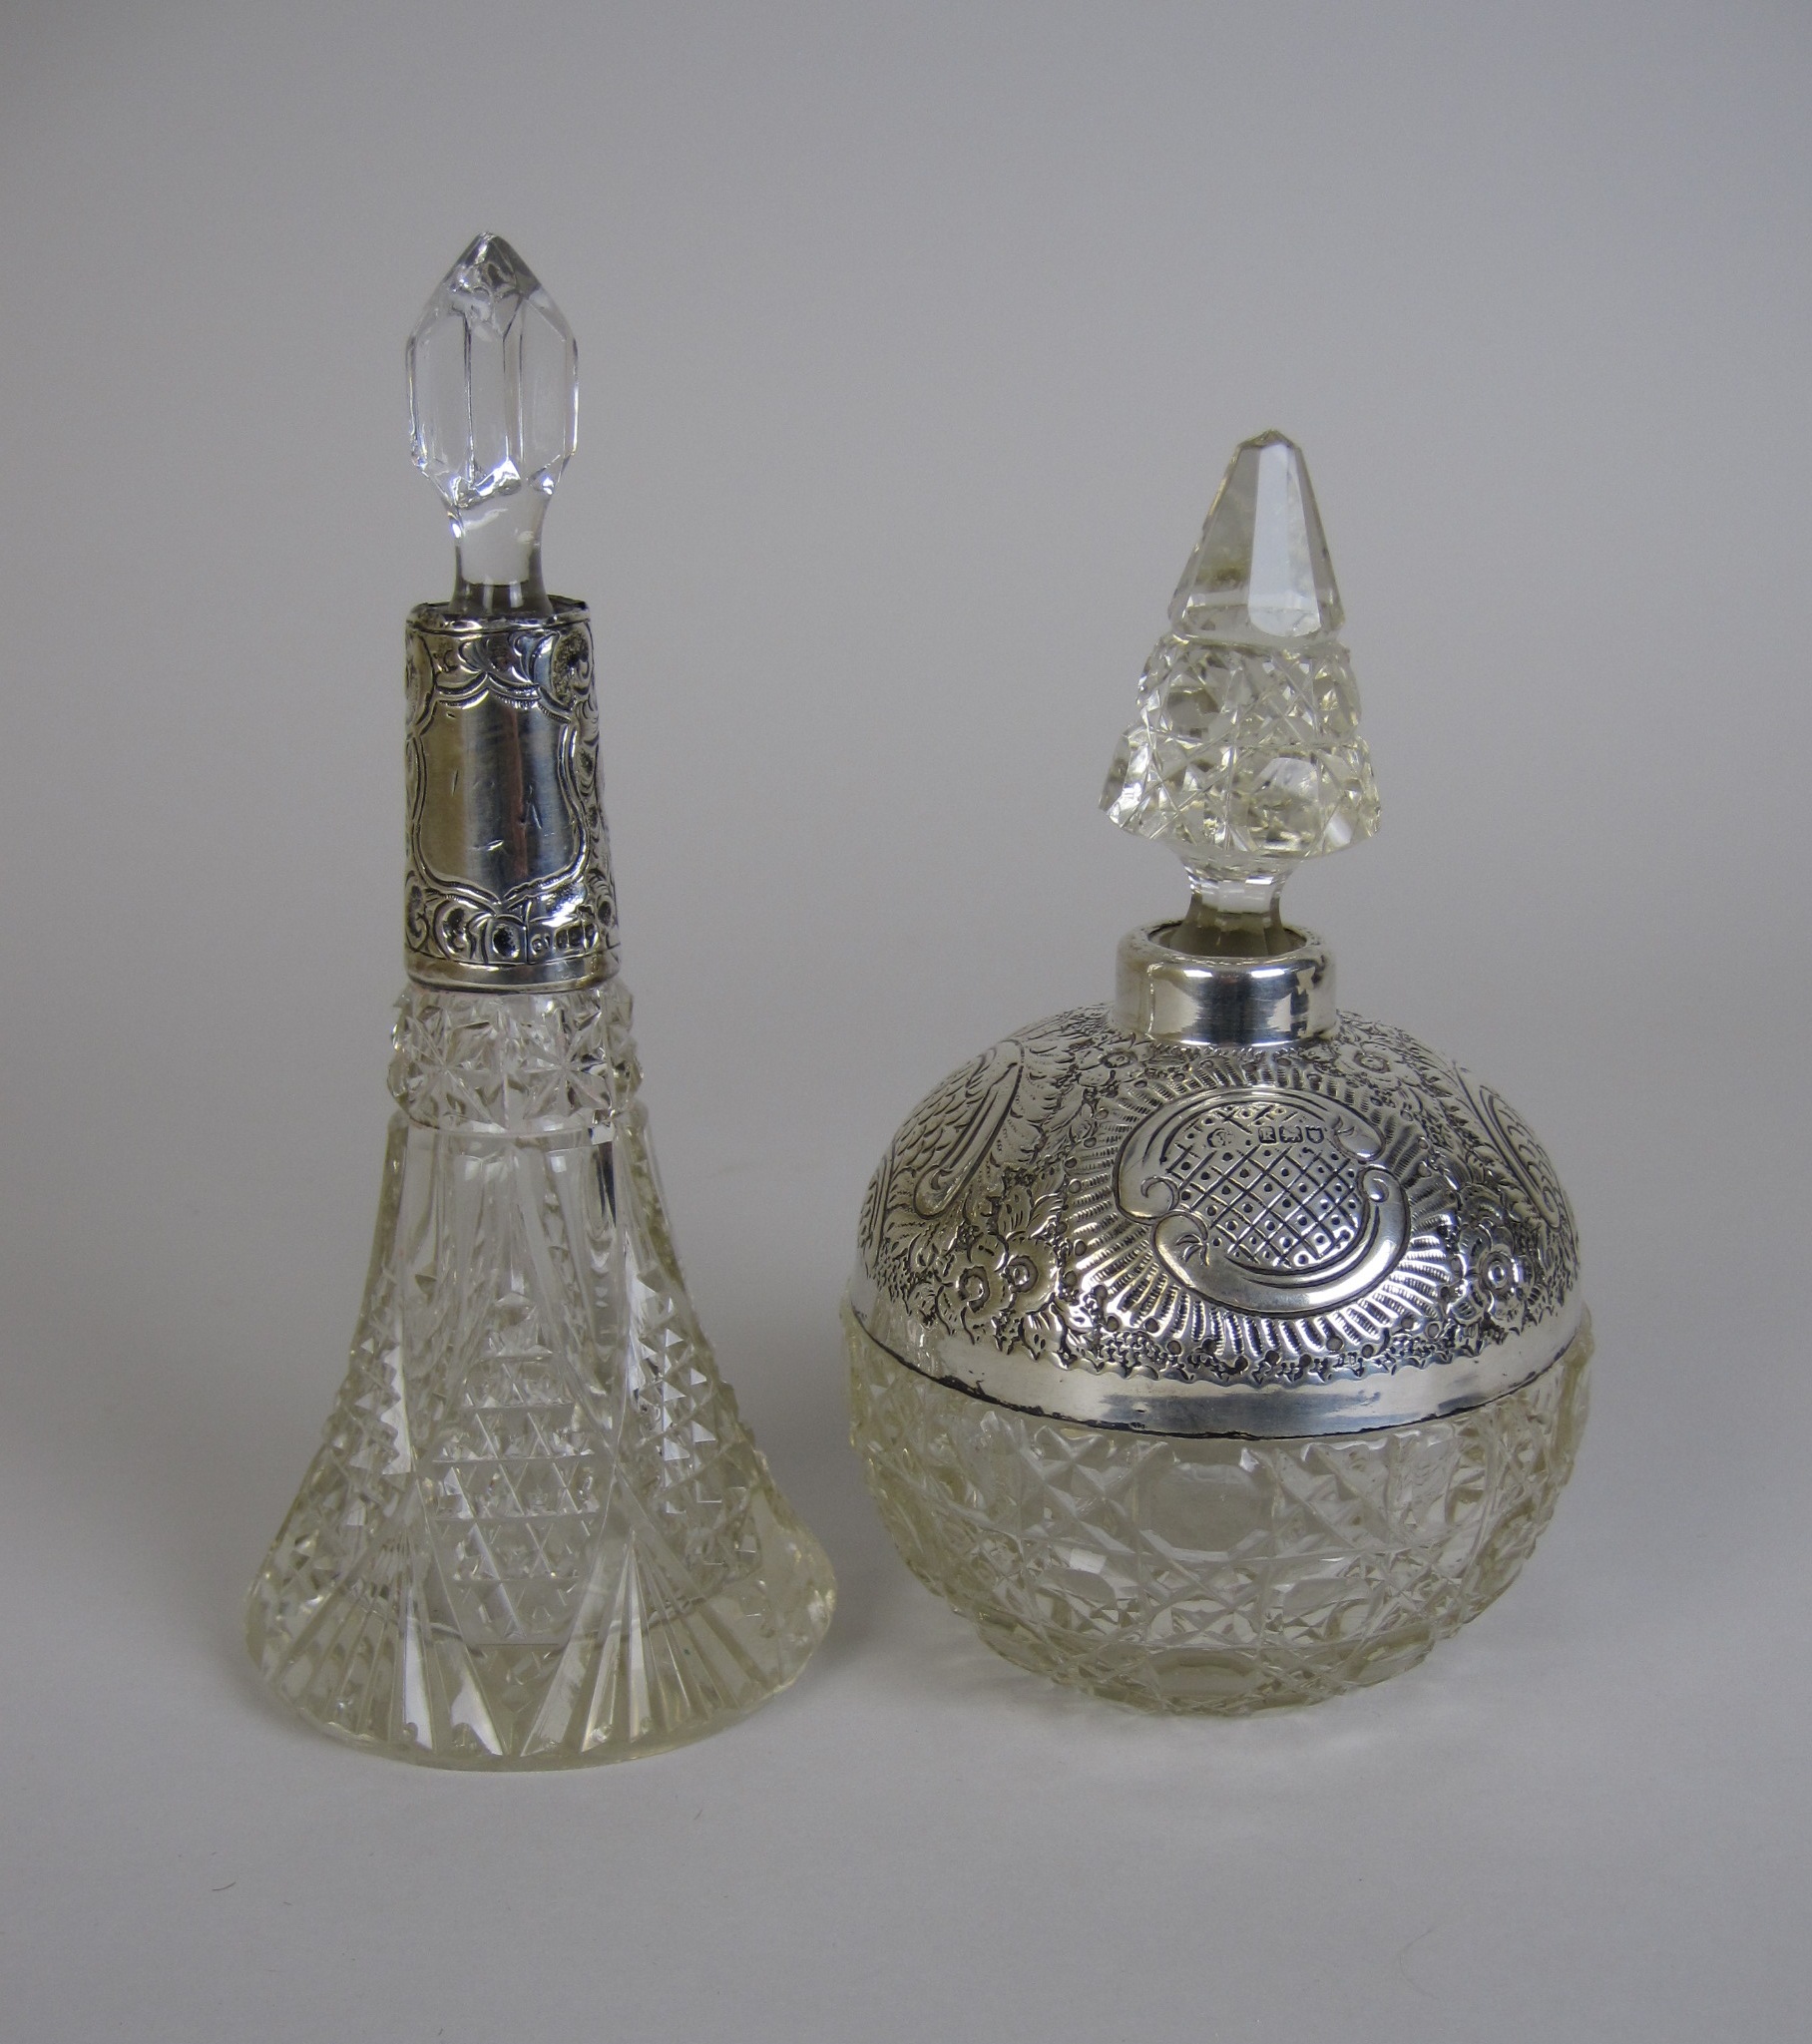 A silver mounted globular cut glass Scent Bottle, London 1905, 6 1/2in H and a silver collared cut